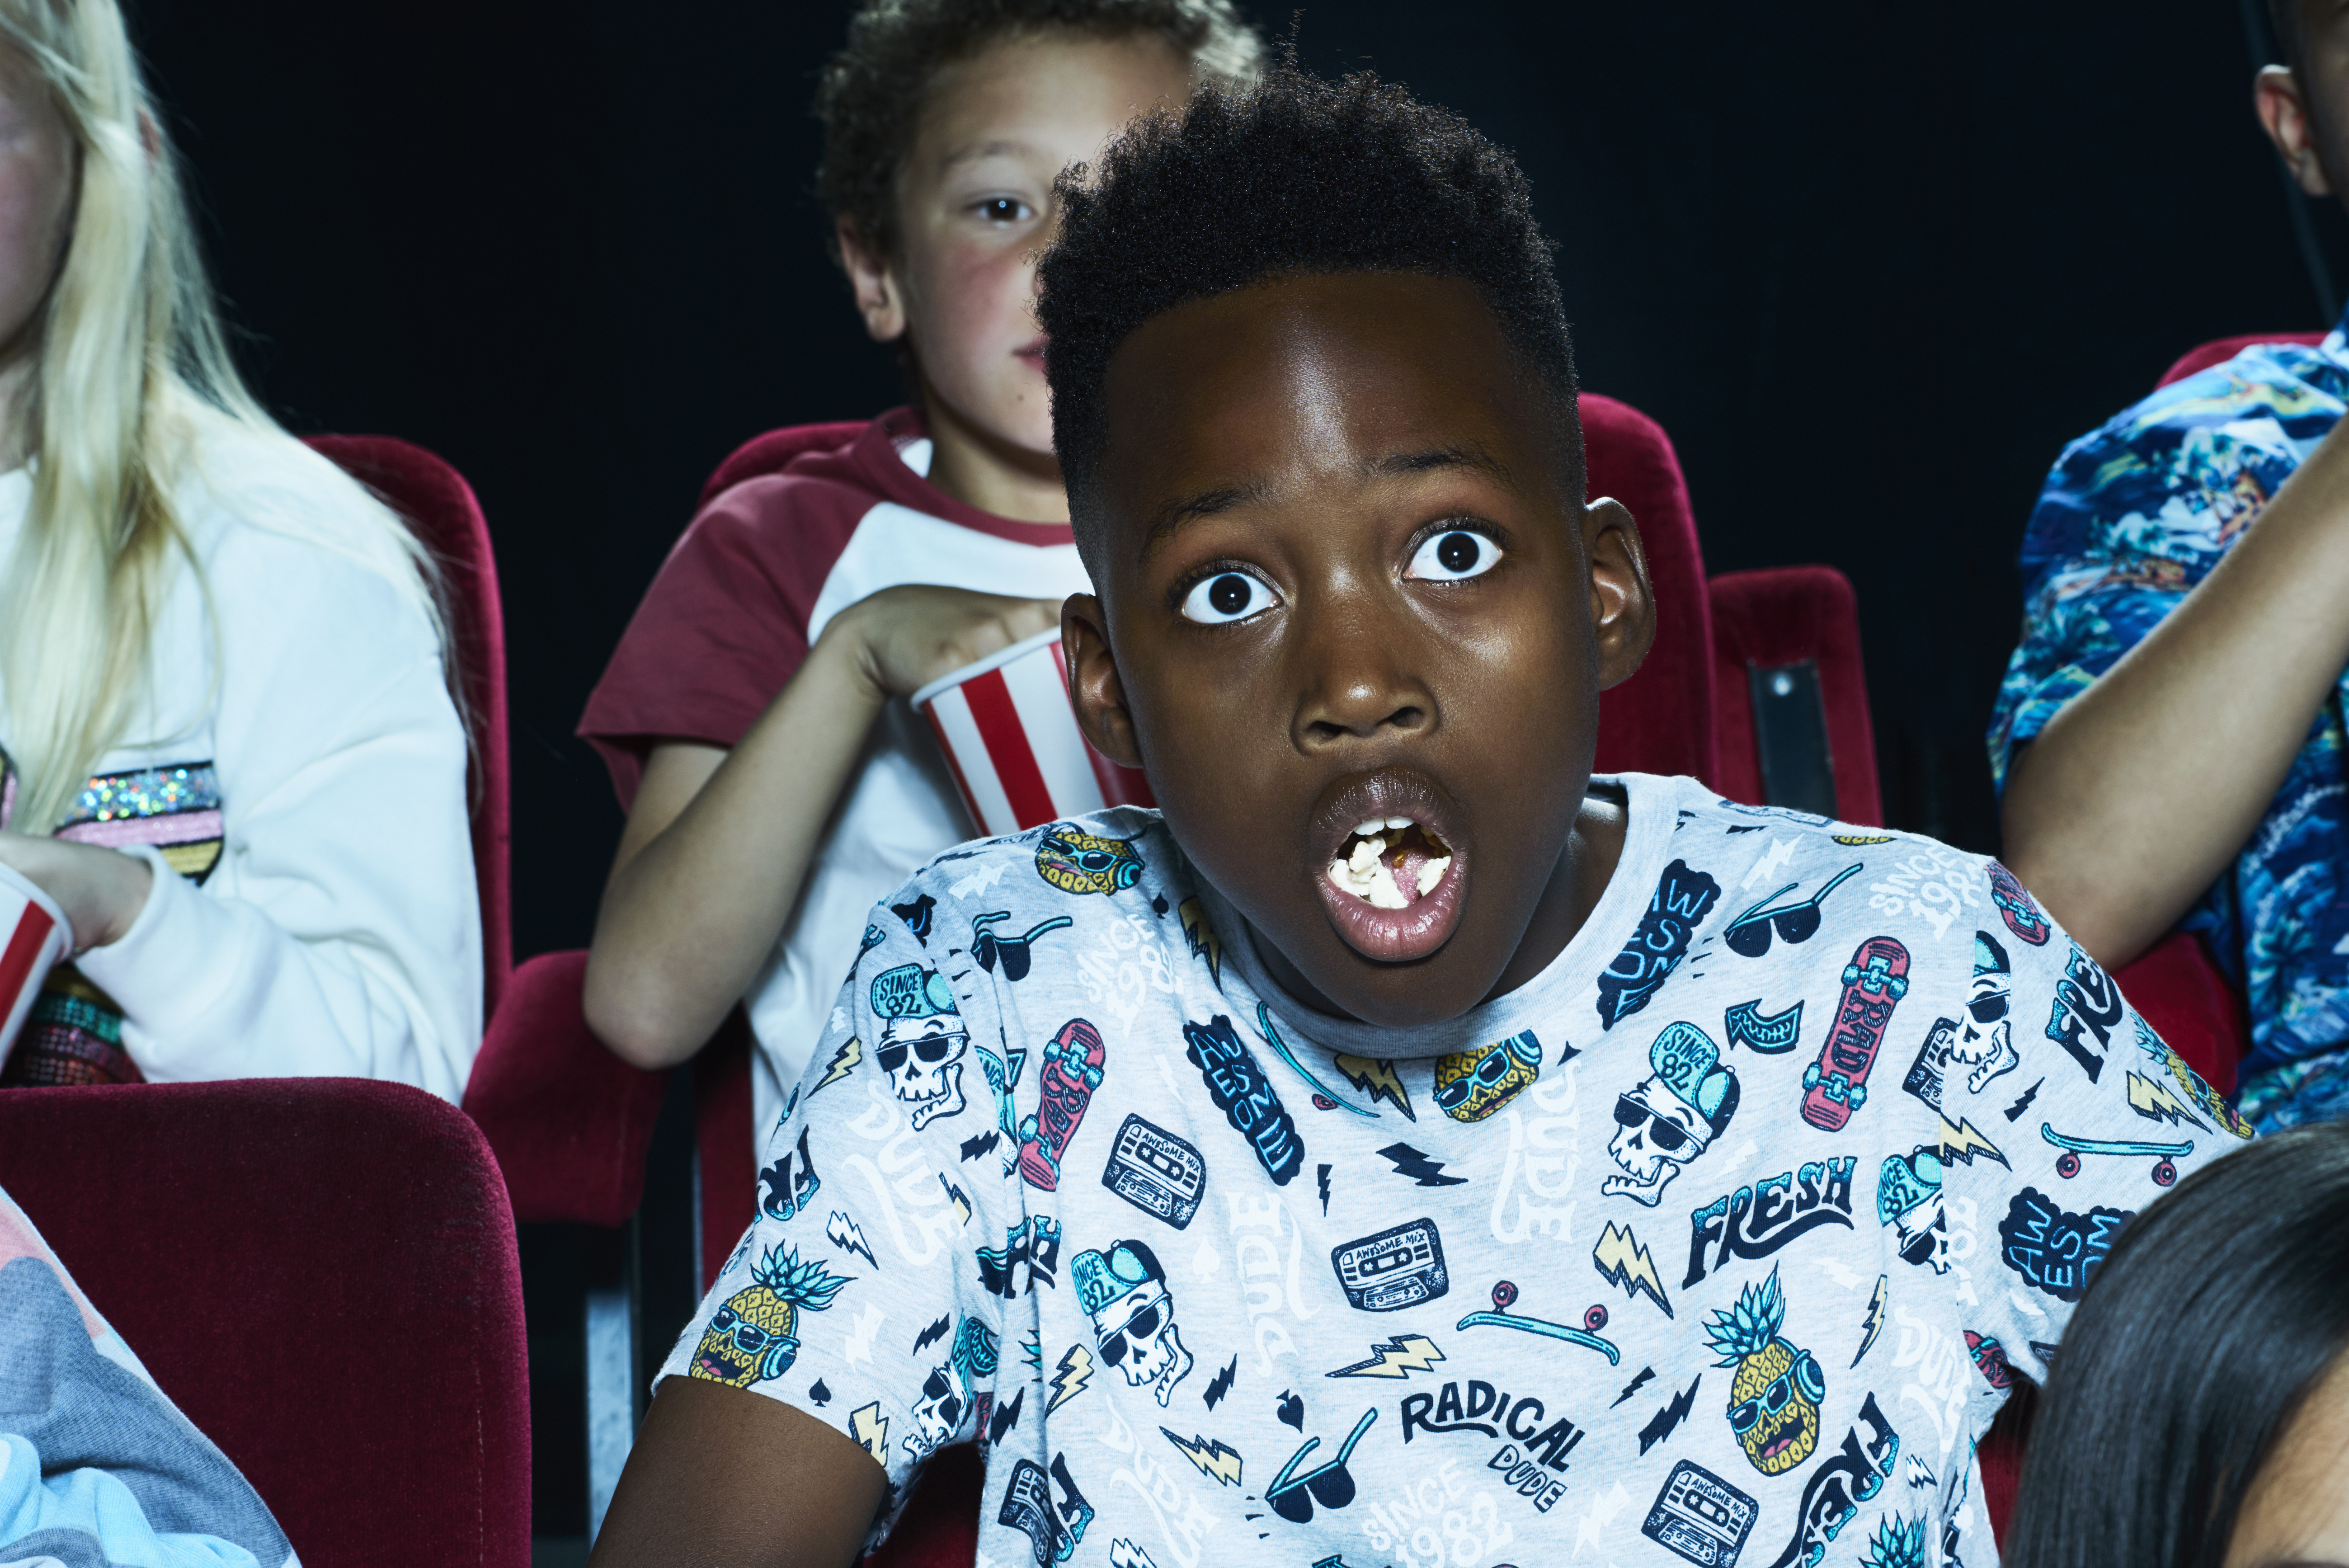 Group of children enjoying a movie at the cinema